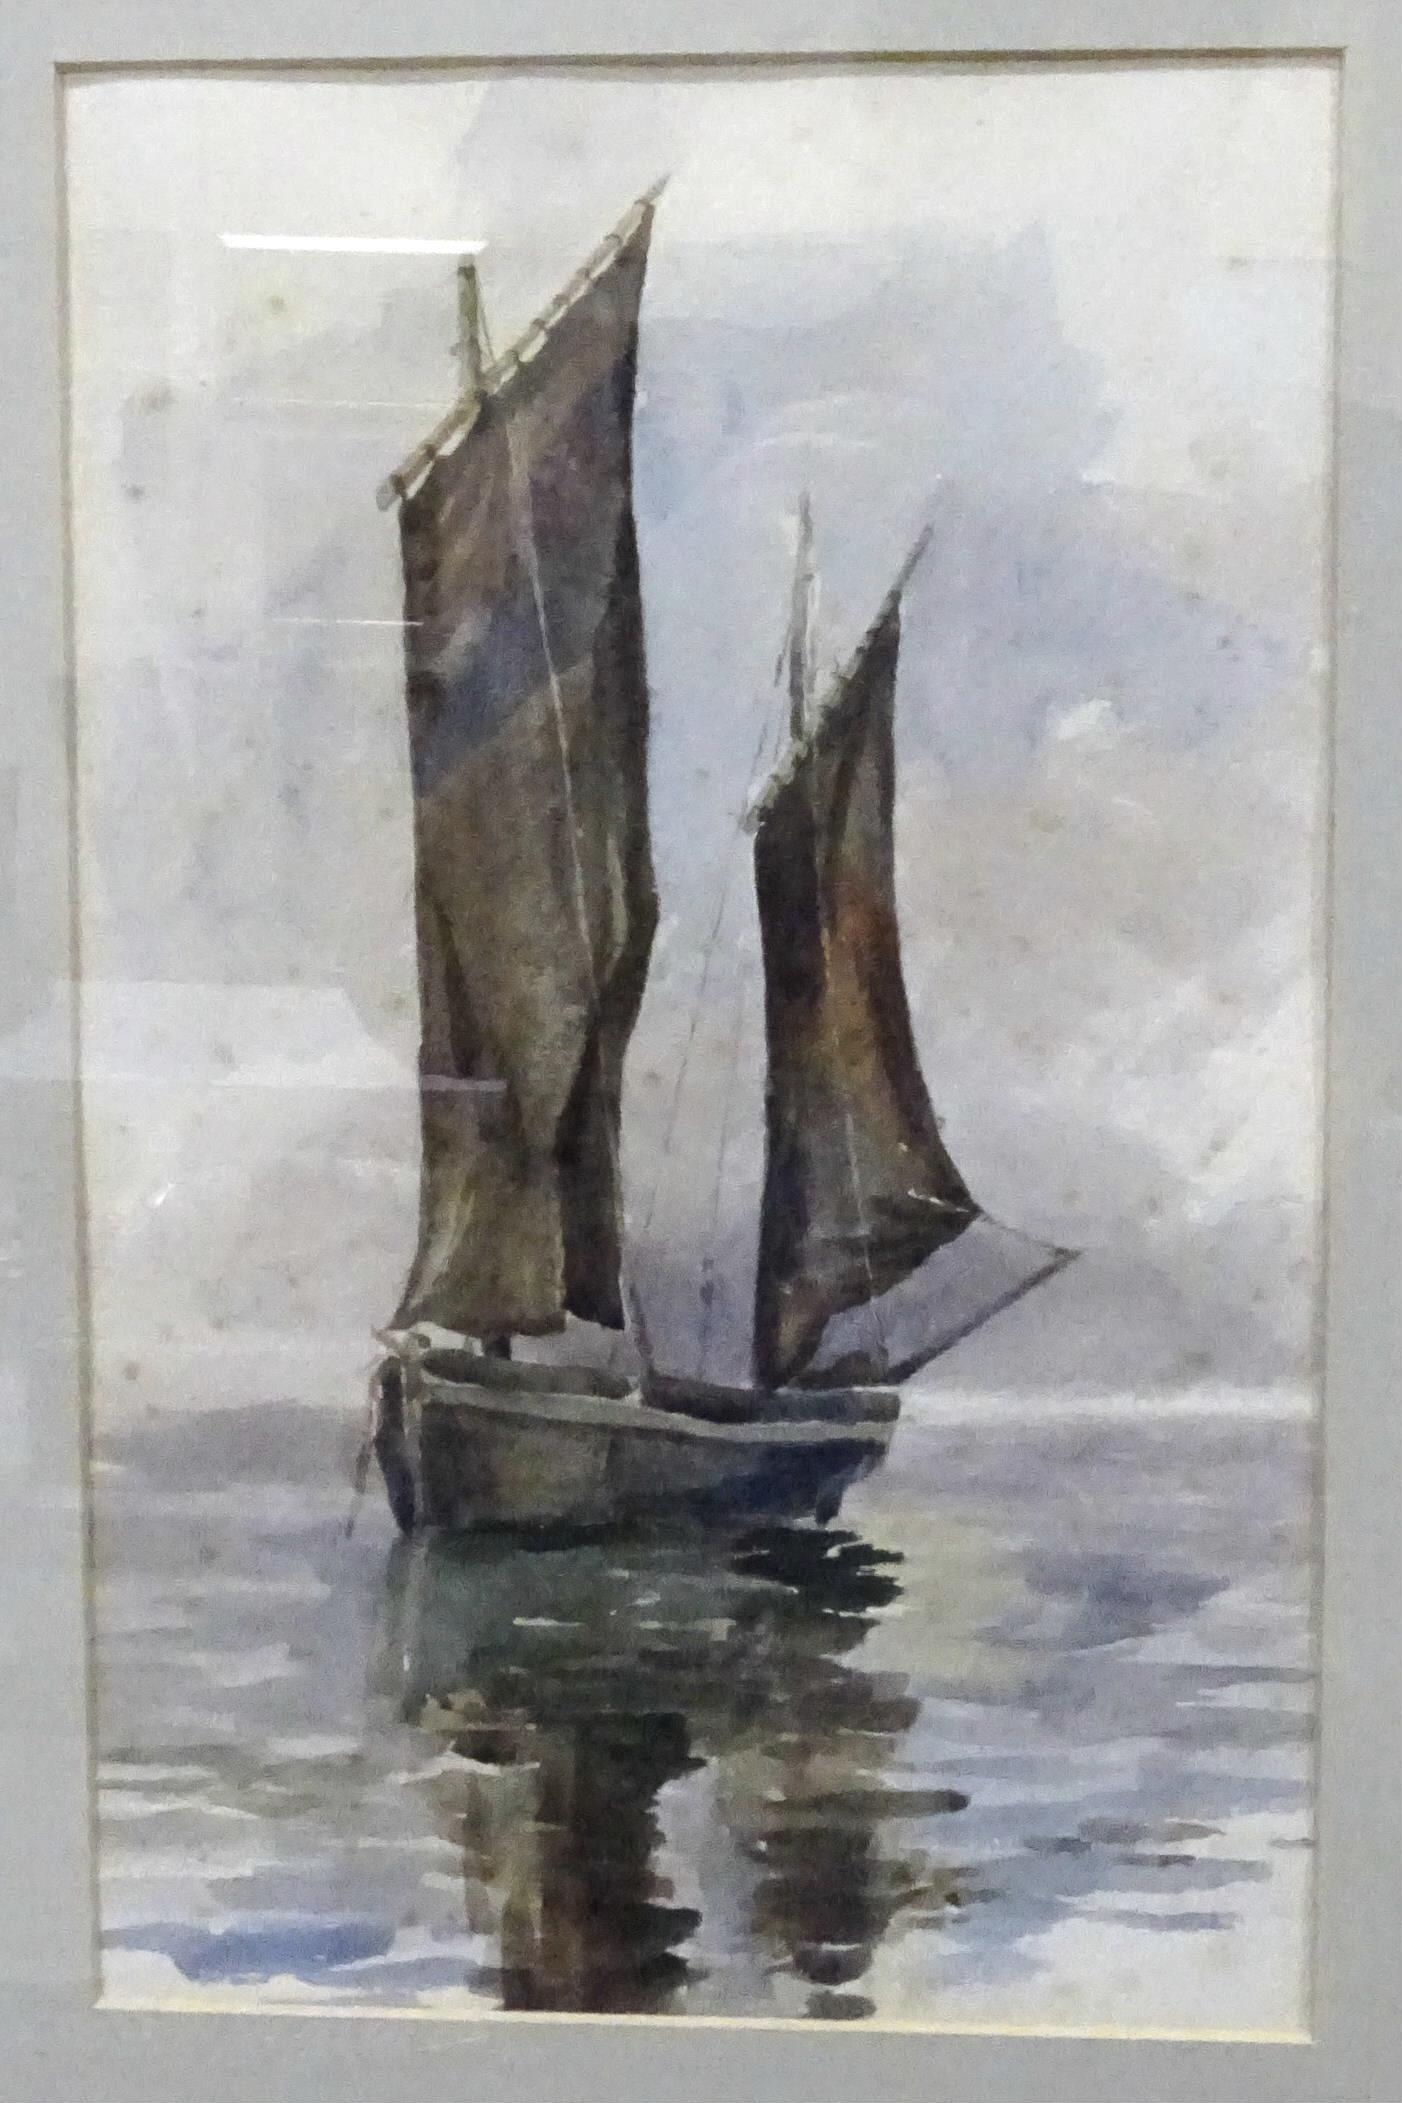 E.E.N, 'Fishing vessels with buoy in foreground', oil on canvas, initialled, 20 x 53.5cm and a - Image 3 of 5